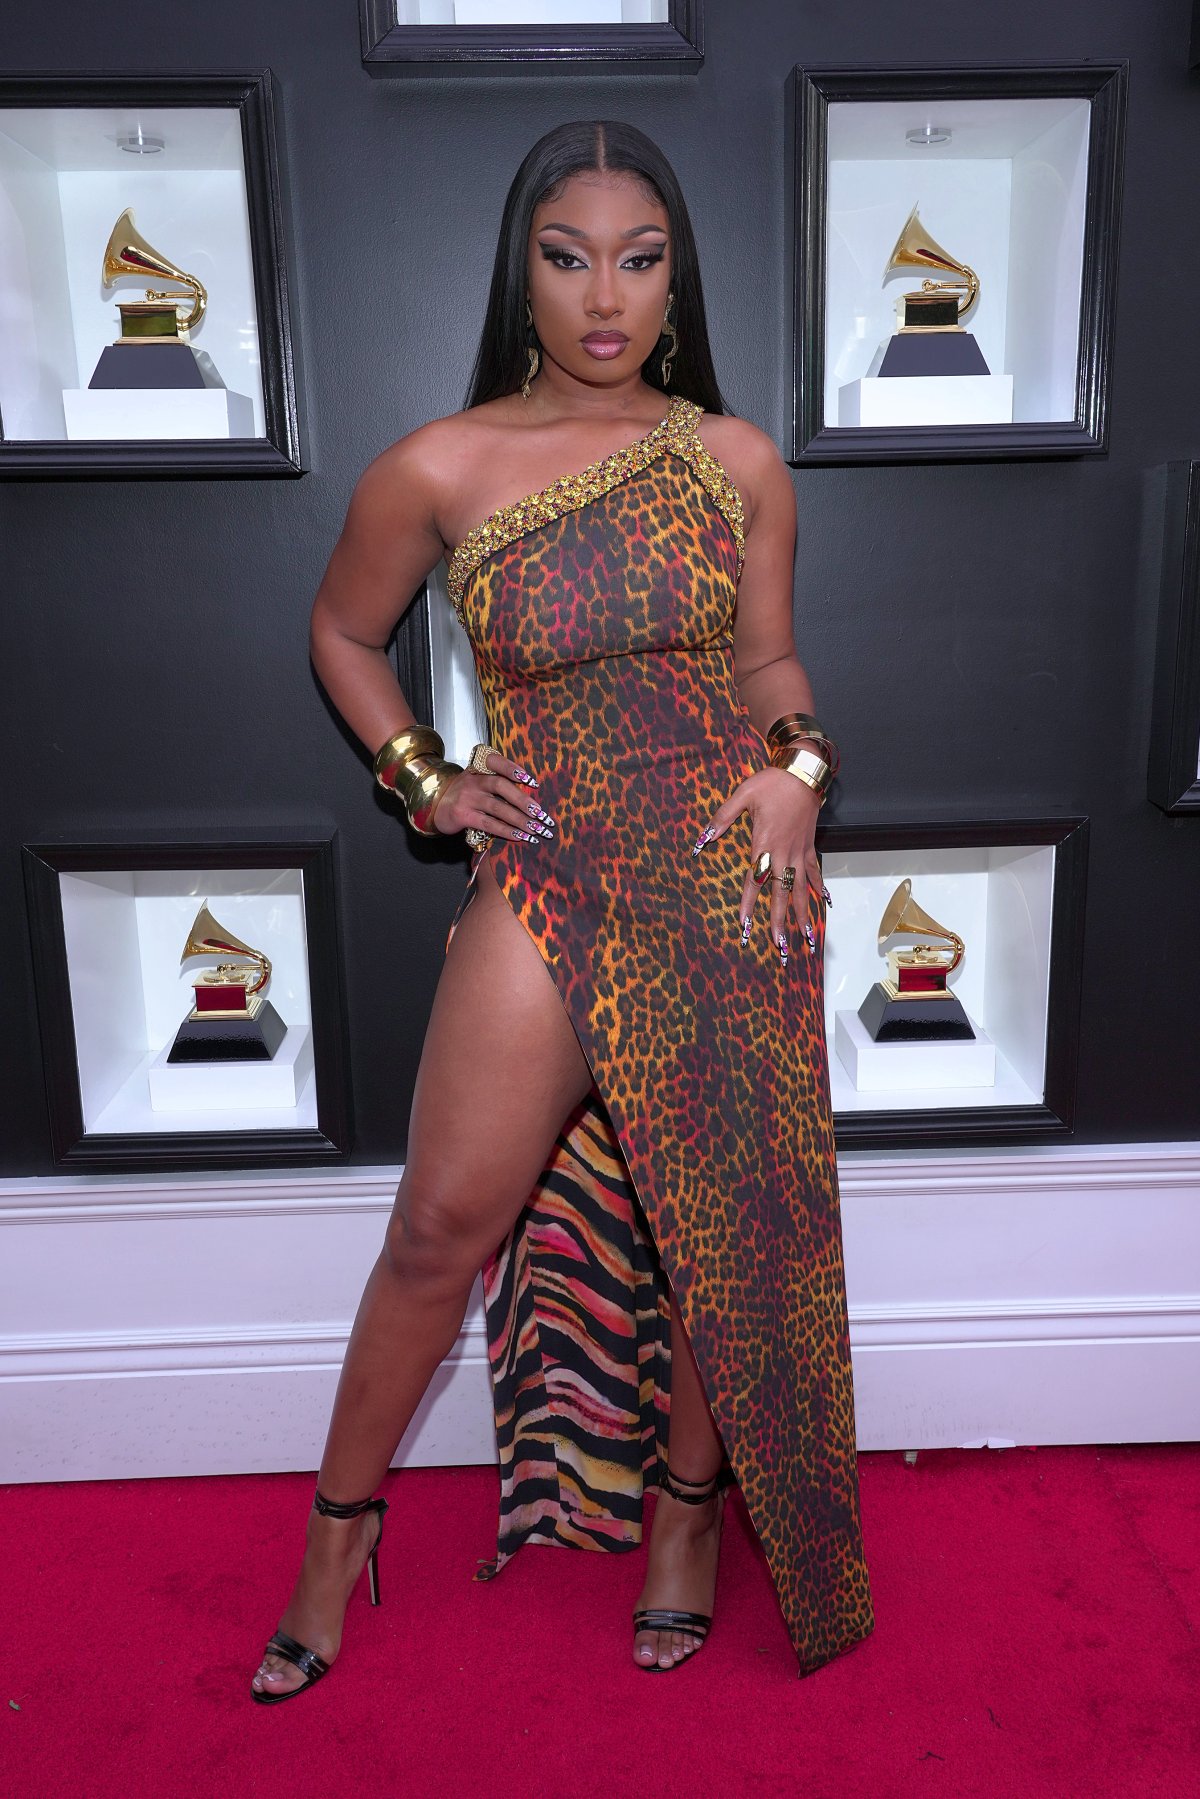 Grammy Awards 2022: Best and worst dressed celebrities on the red